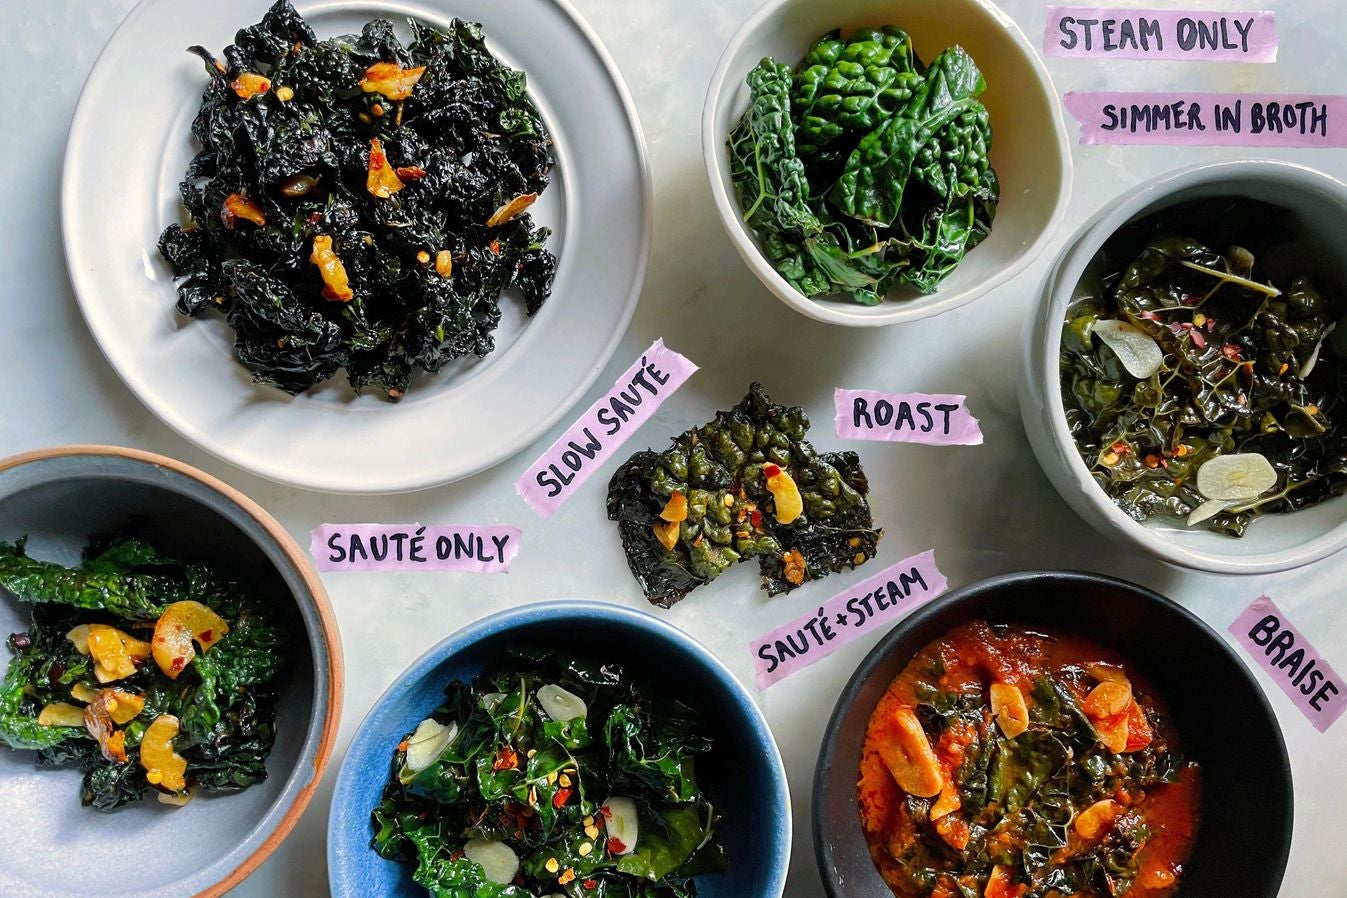 Seven different preparations of kale labeled sauté only, slow sauté, sauté and steam, roast, simmer in broth, steam only, and braise. All but the bowl of steam-only kale are topped with sliced garlic and red pepper flakes.